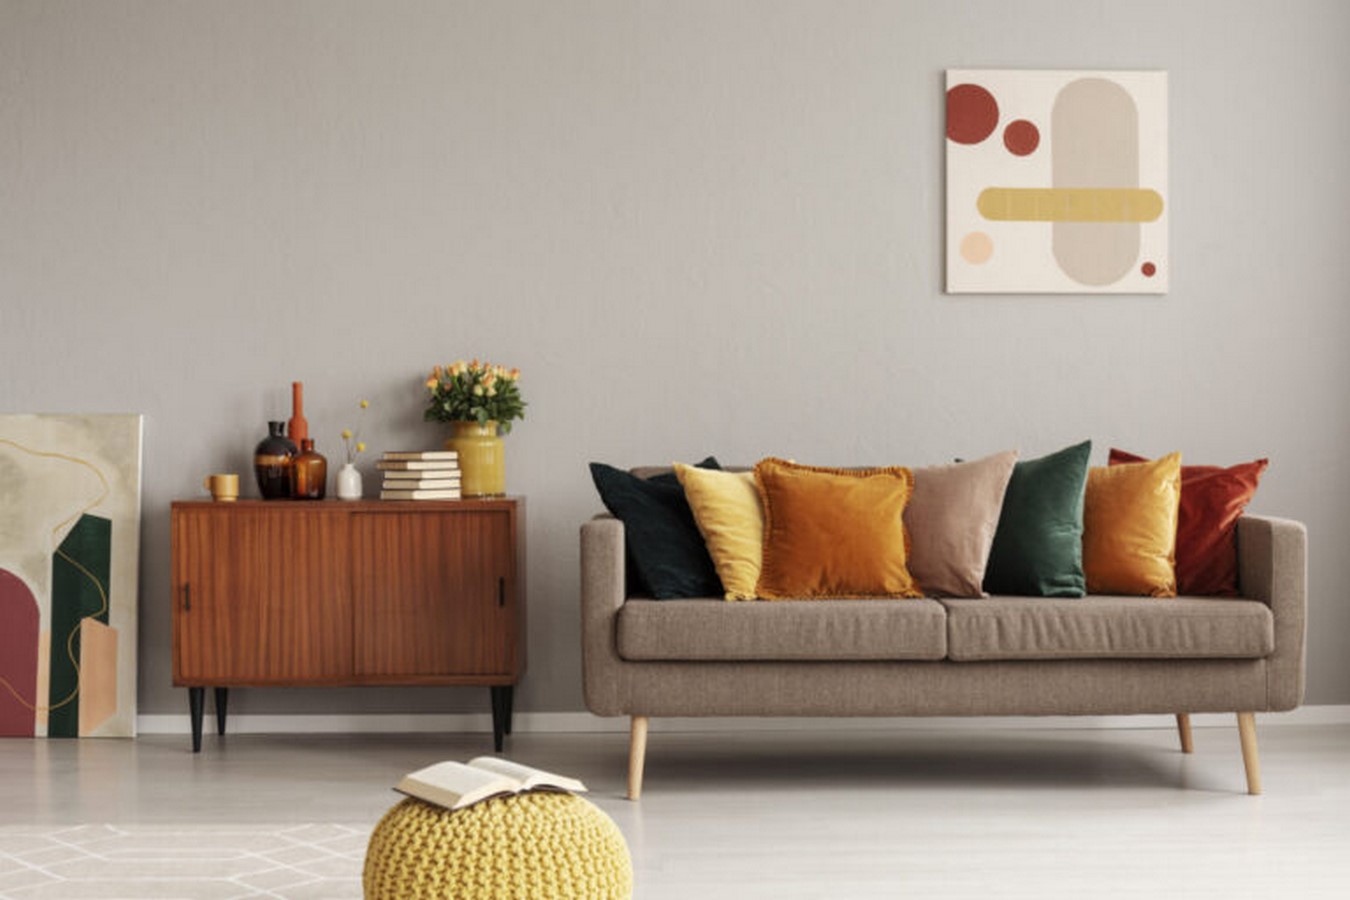 A3978 30 Examples Of Split Complementary Color Scheme In Interiors IMAGE 3 